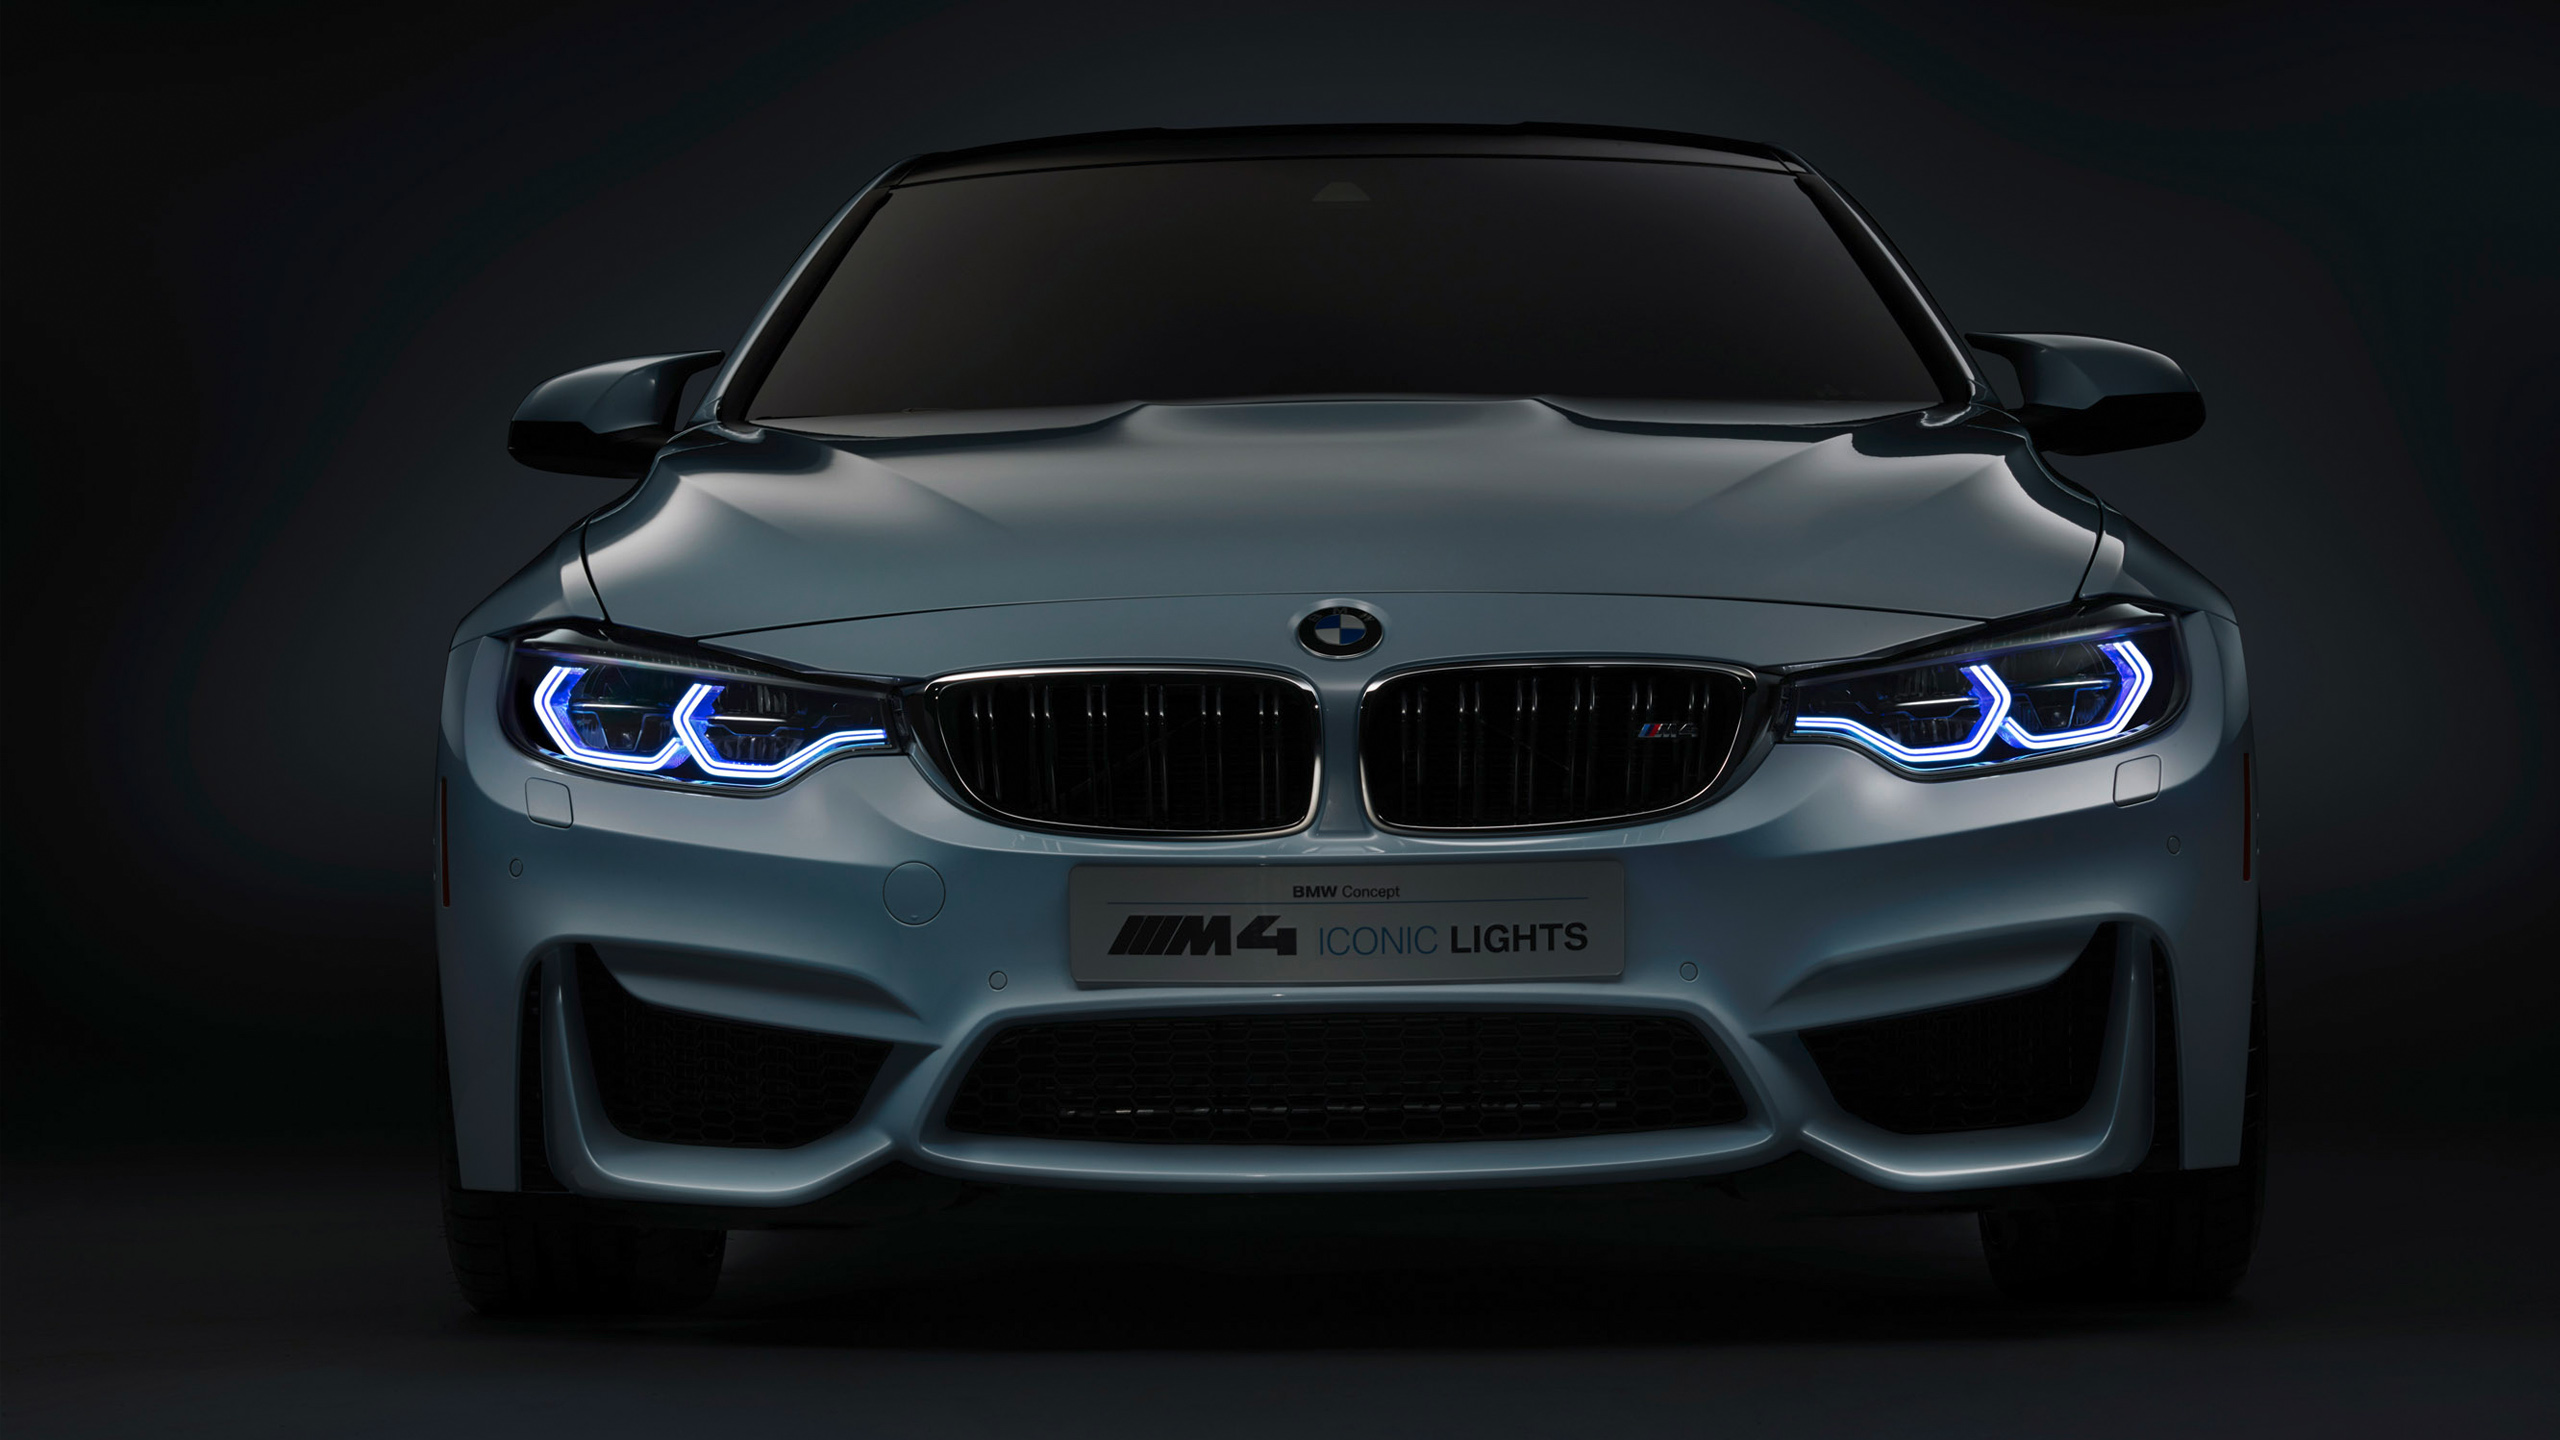 2015 BMW M4 Concept Iconic Lights Wallpaper  HD Car Wallpapers